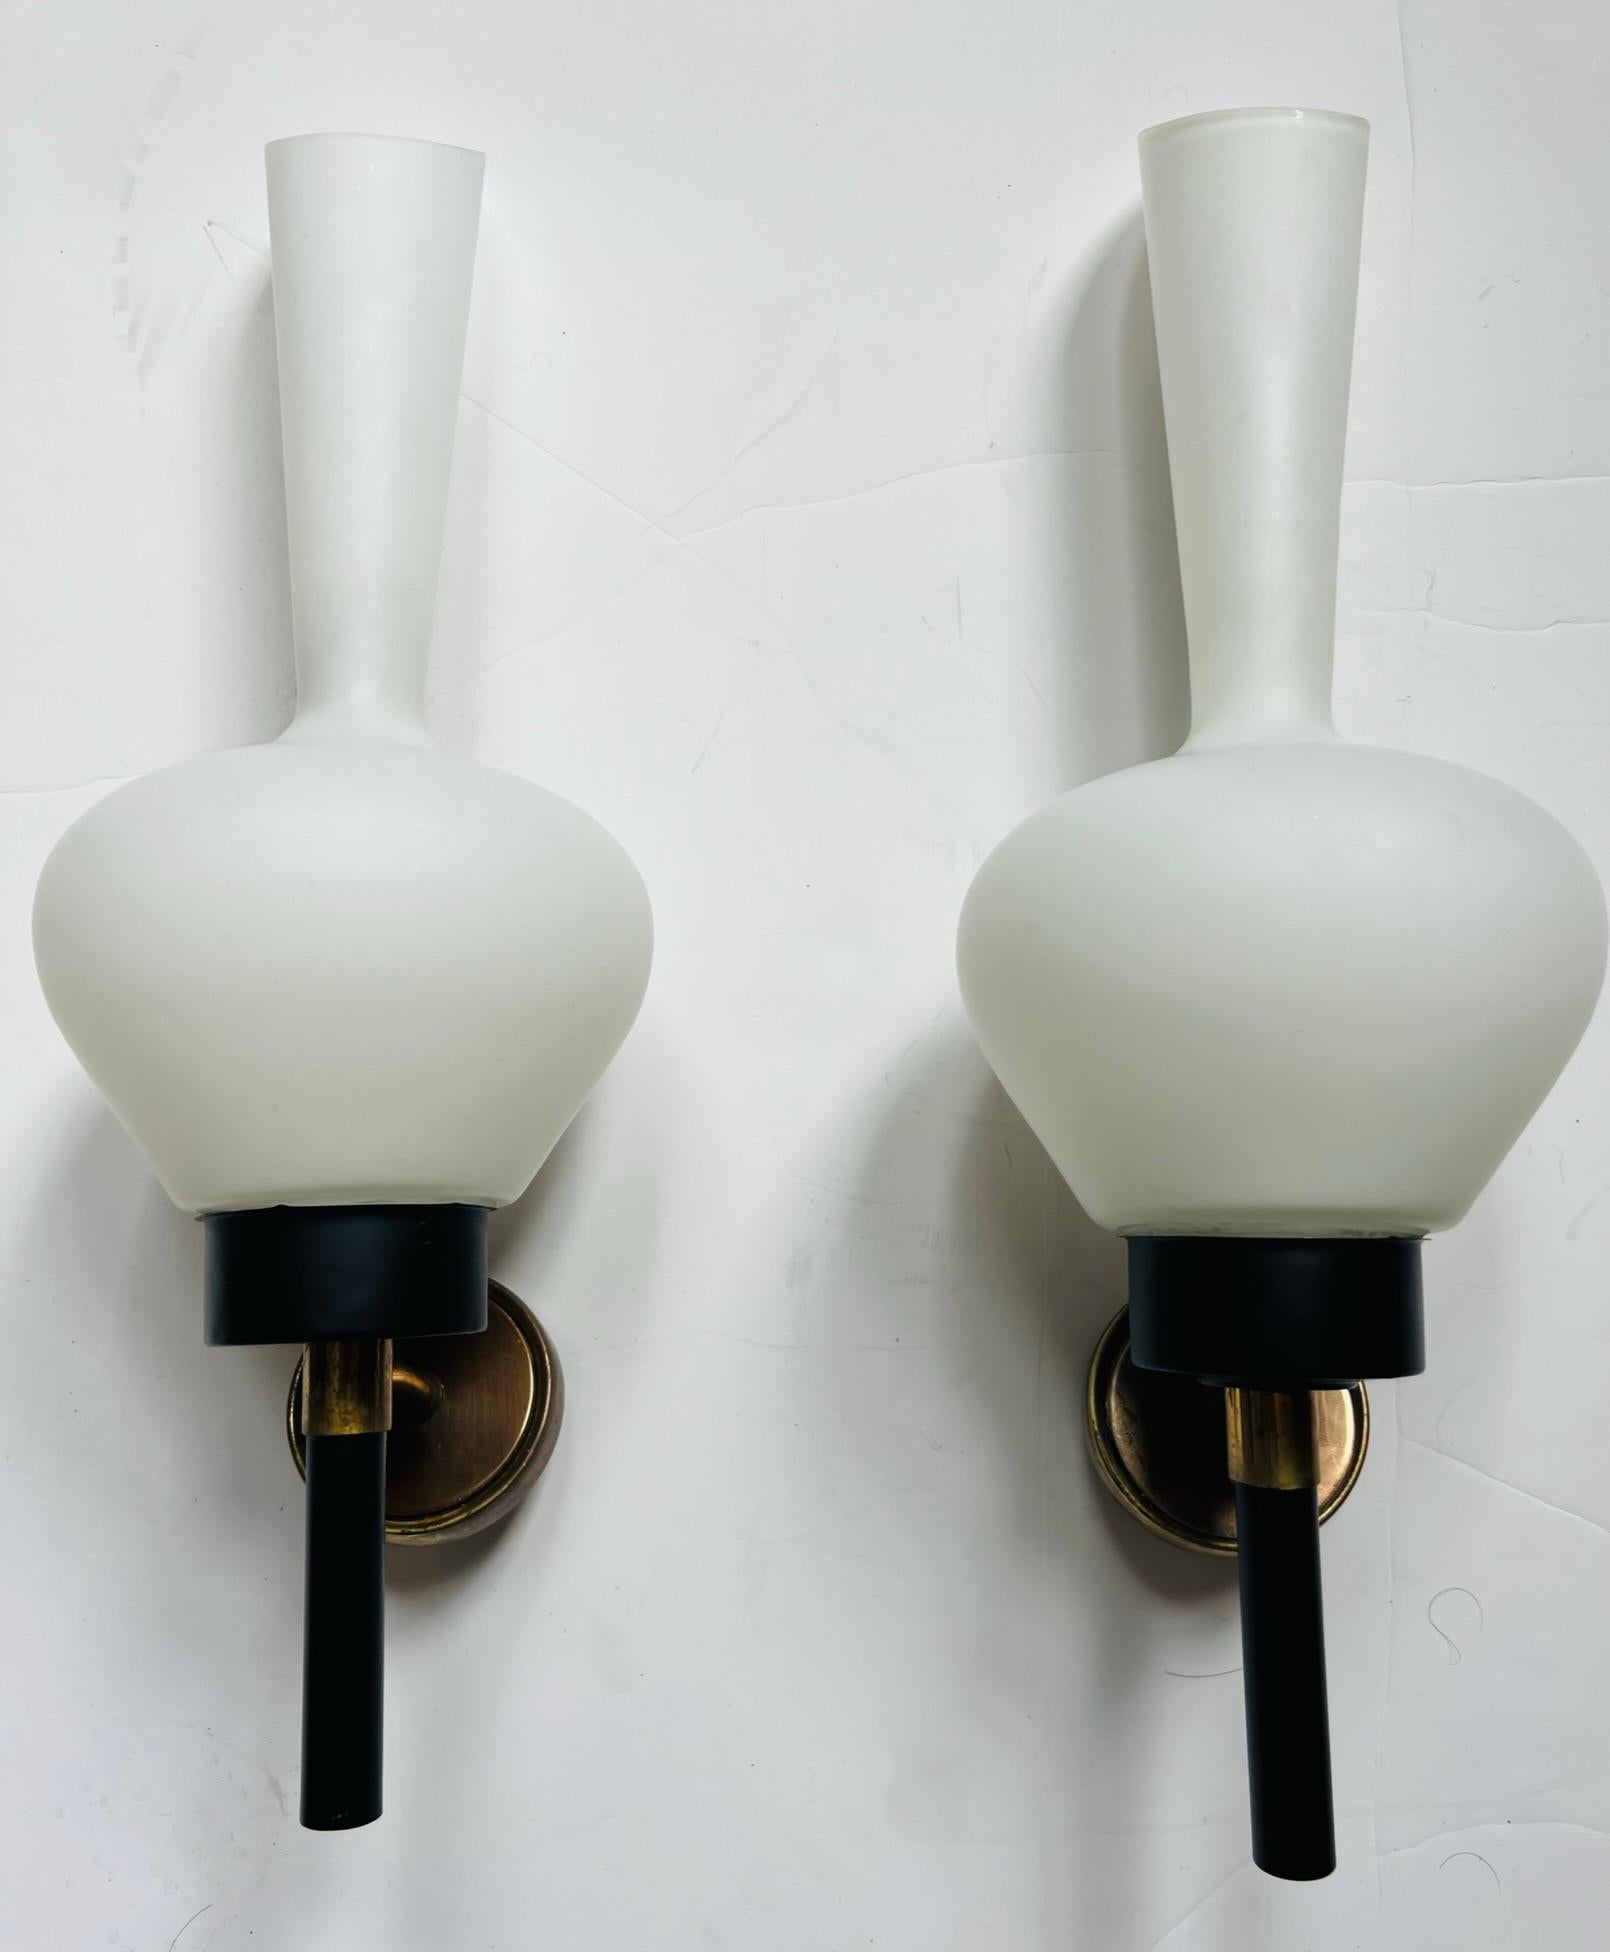 A beautiful large pair of 1950s French wall lights with white elongated glass shades and black enamel and aged brass fixtures. Matching 5” back plates provided. Rewired.Rare.. 7” depth with added American backplate. Last two pictures show the added